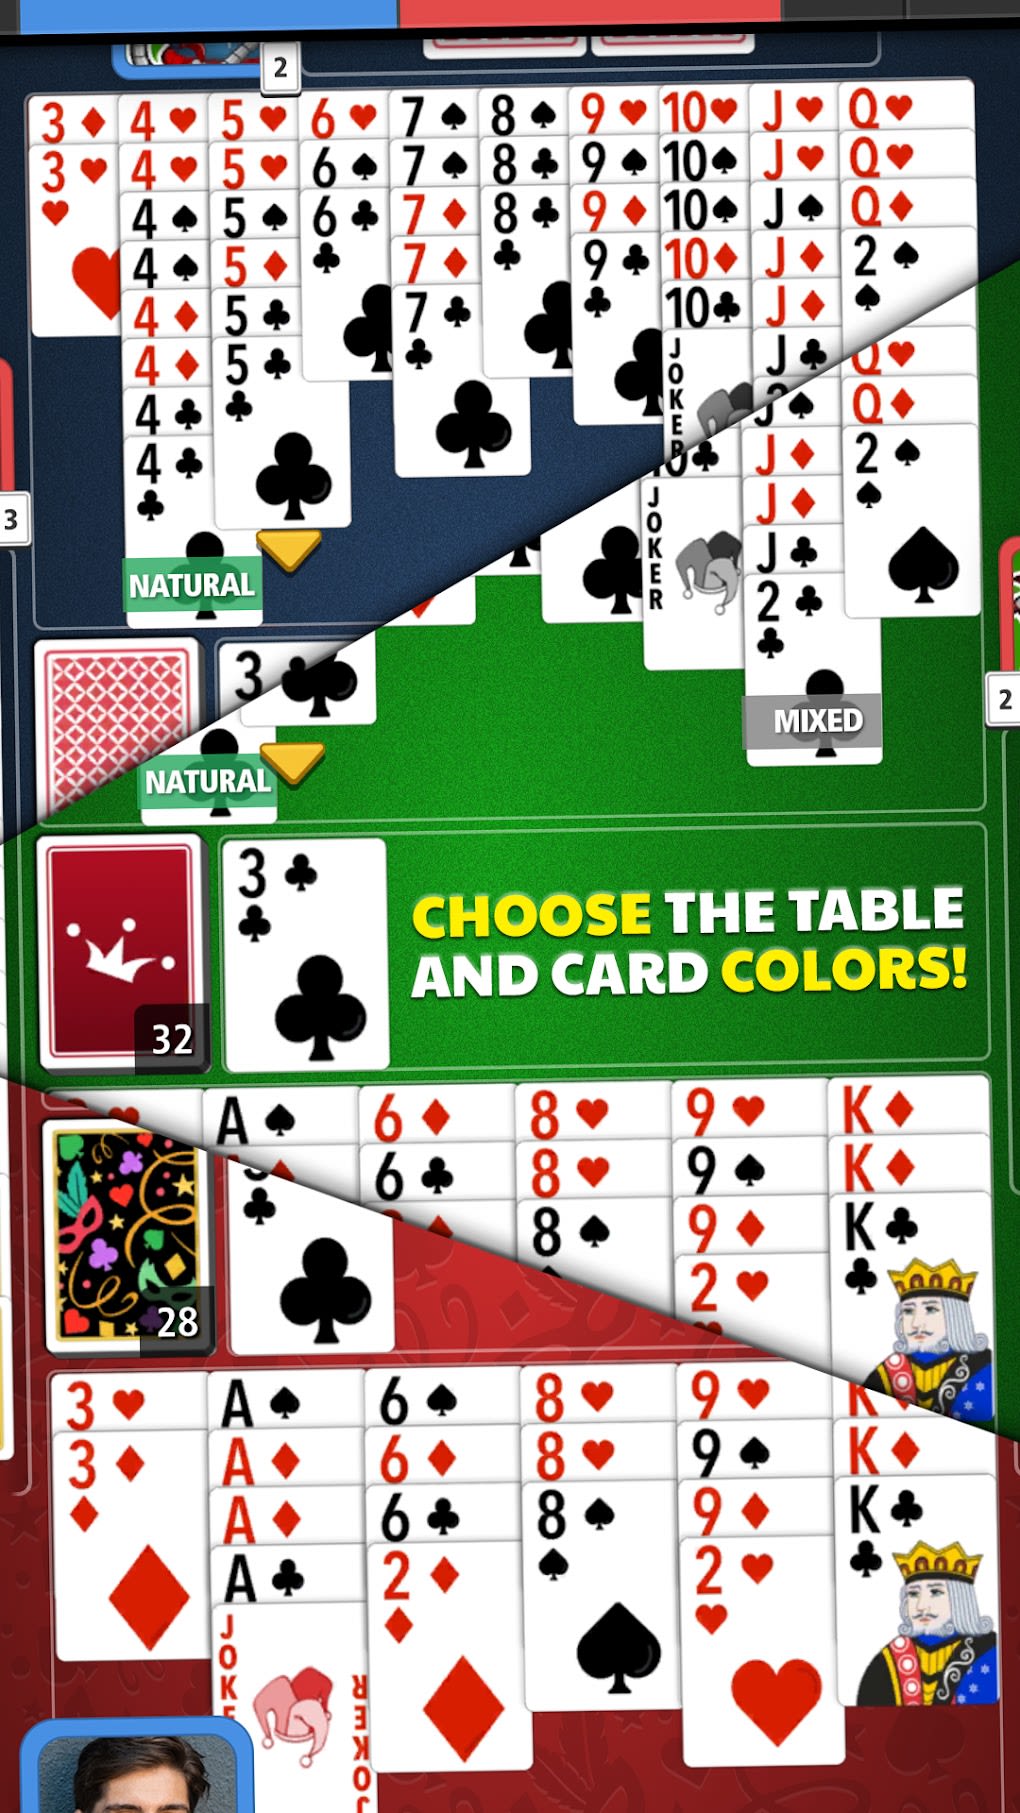 Canasta Turbo: Play for free on your smartphone and tablet